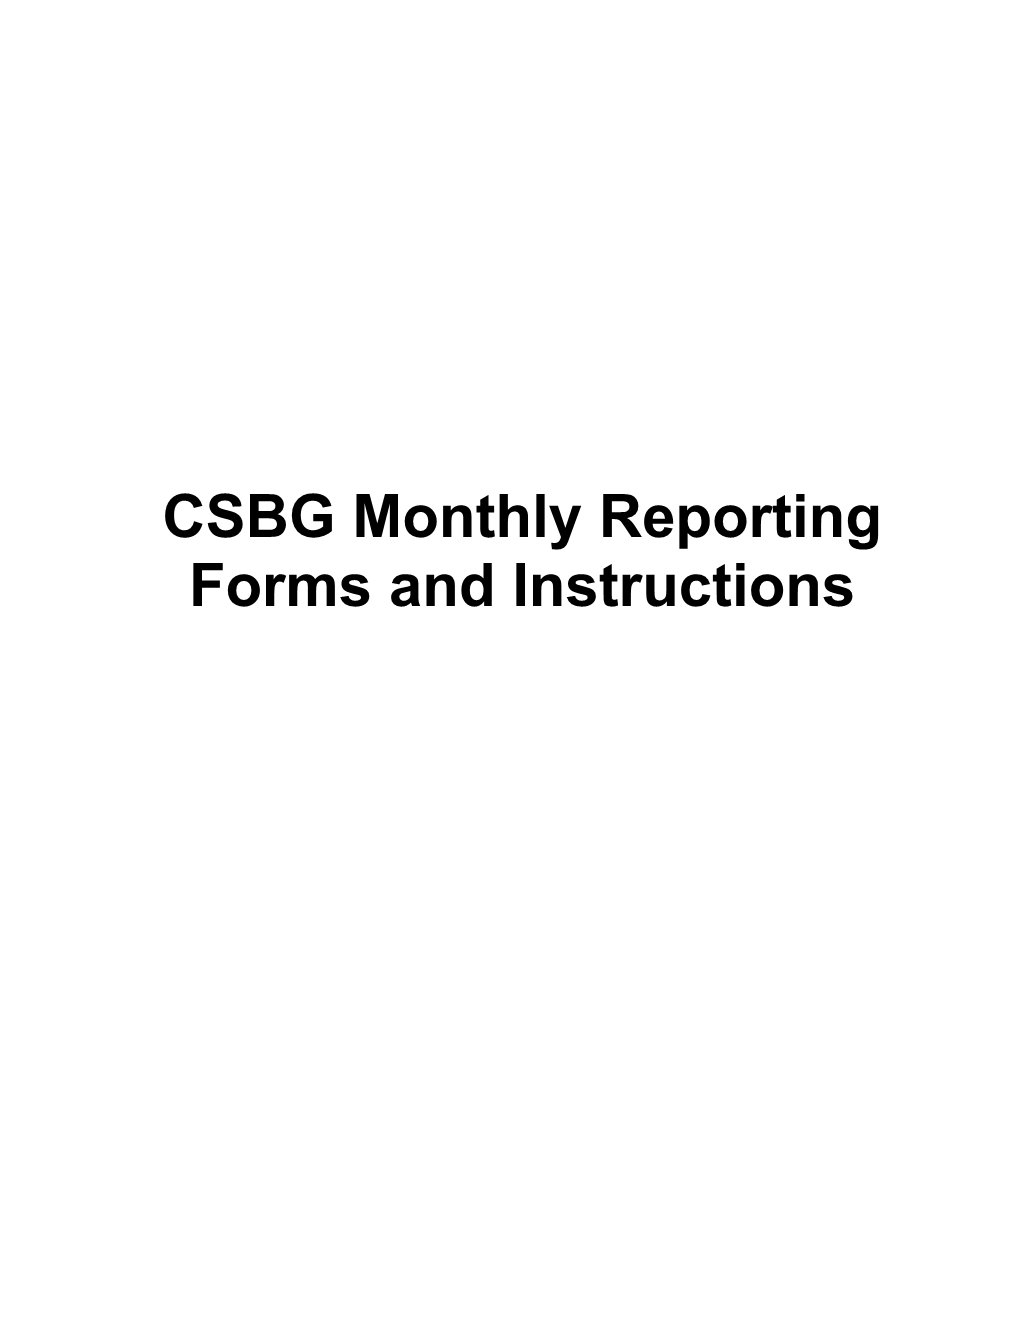 CSBG Monthly Performance Report Instructions